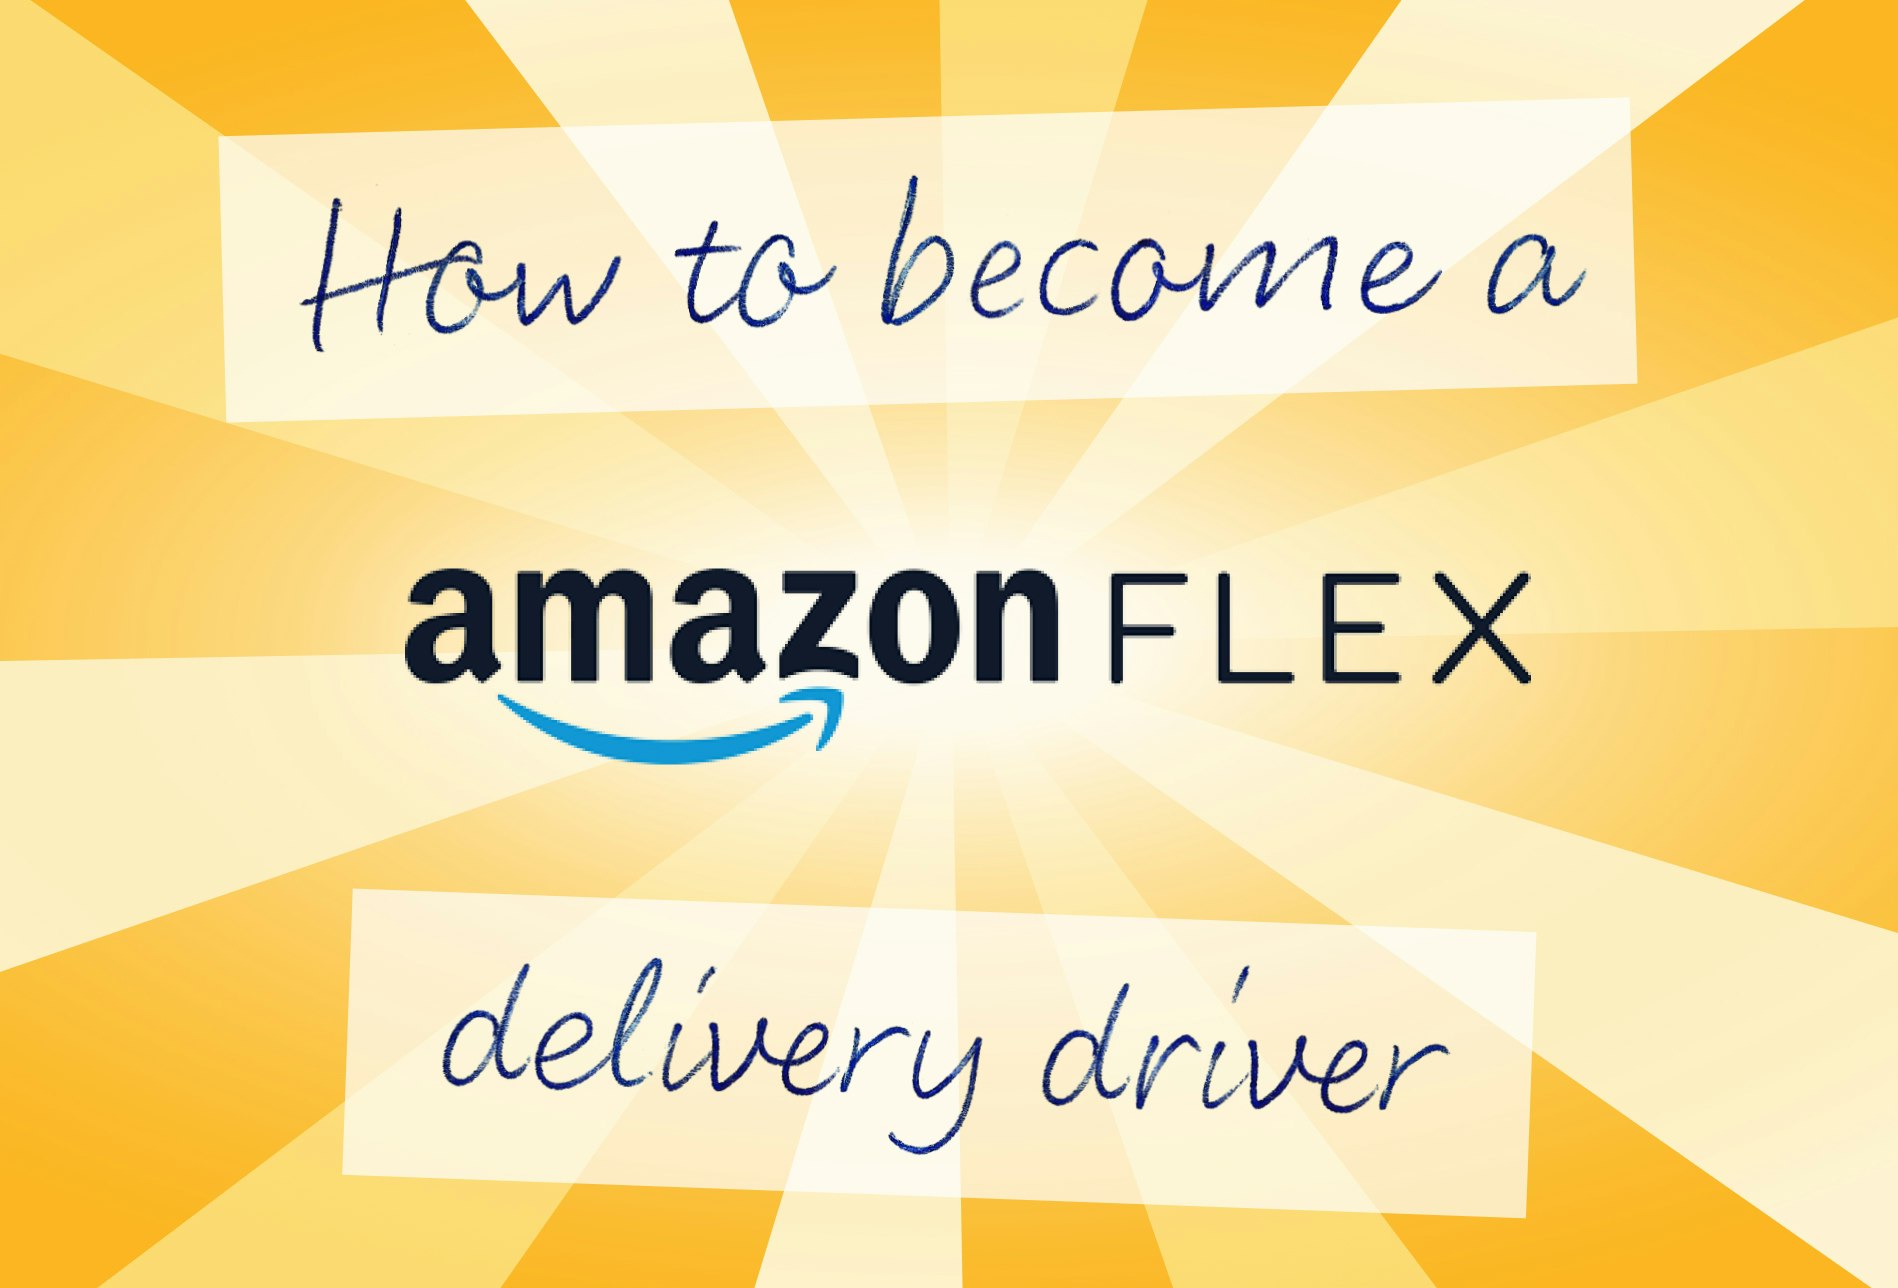 How to become an Amazon Flex delivery driver